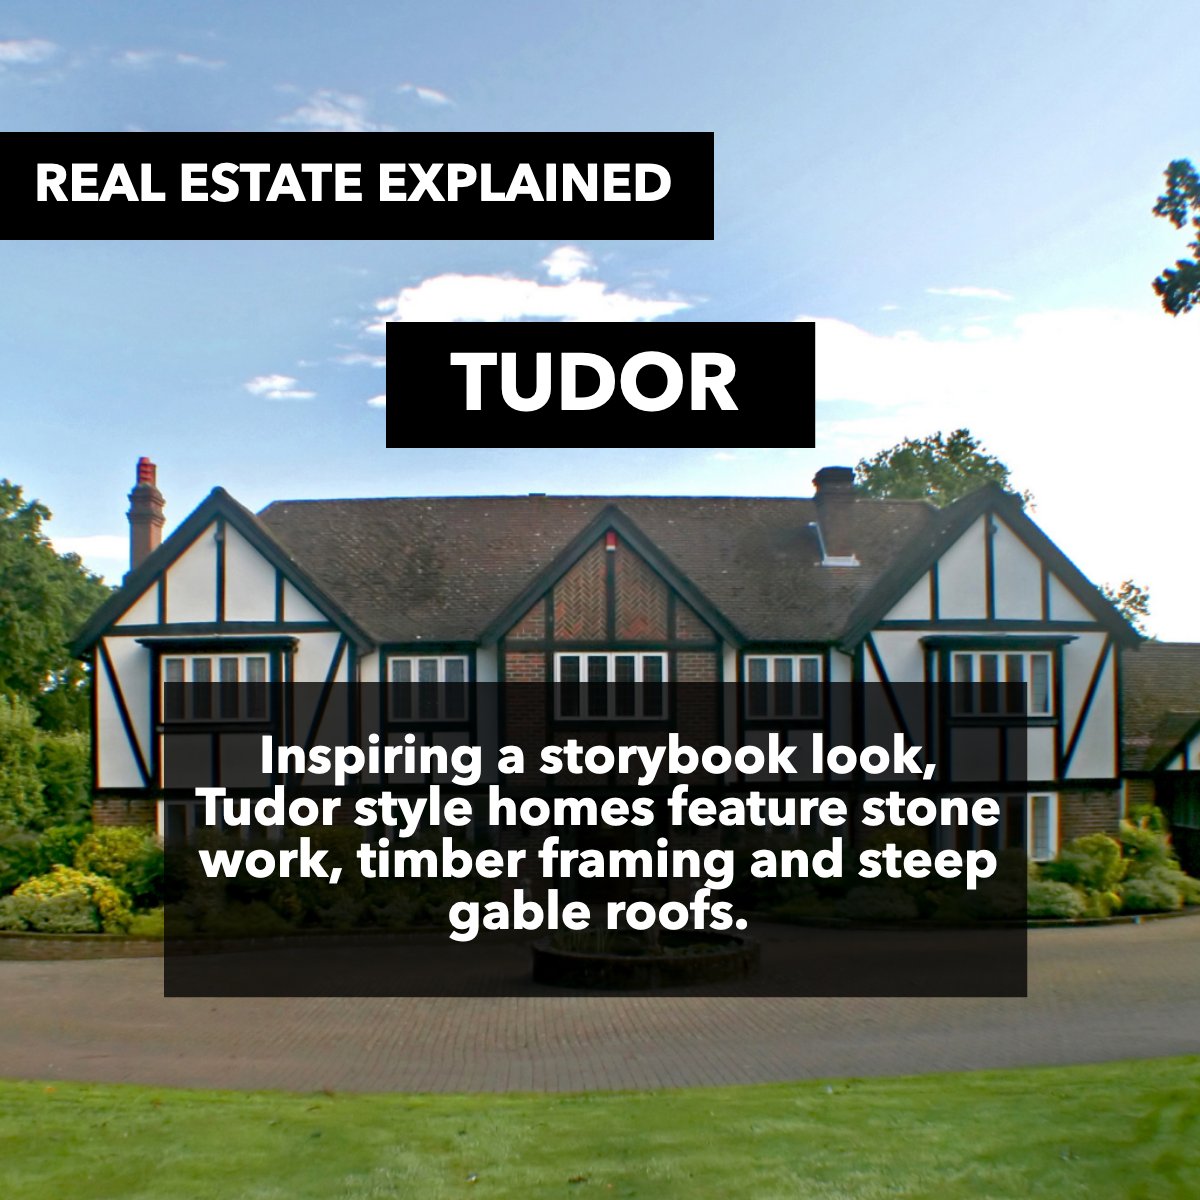 Charming, intricate, and classic, Tudor-style homes have been an iconic home style in North America since the 19th century. 🏘️

#tudorstylearchitecture #tudorstylehome #styletudors
 #lasvegasrealtor #lasvegasrealestate #sparrowsells #lasvegashomes #realestate